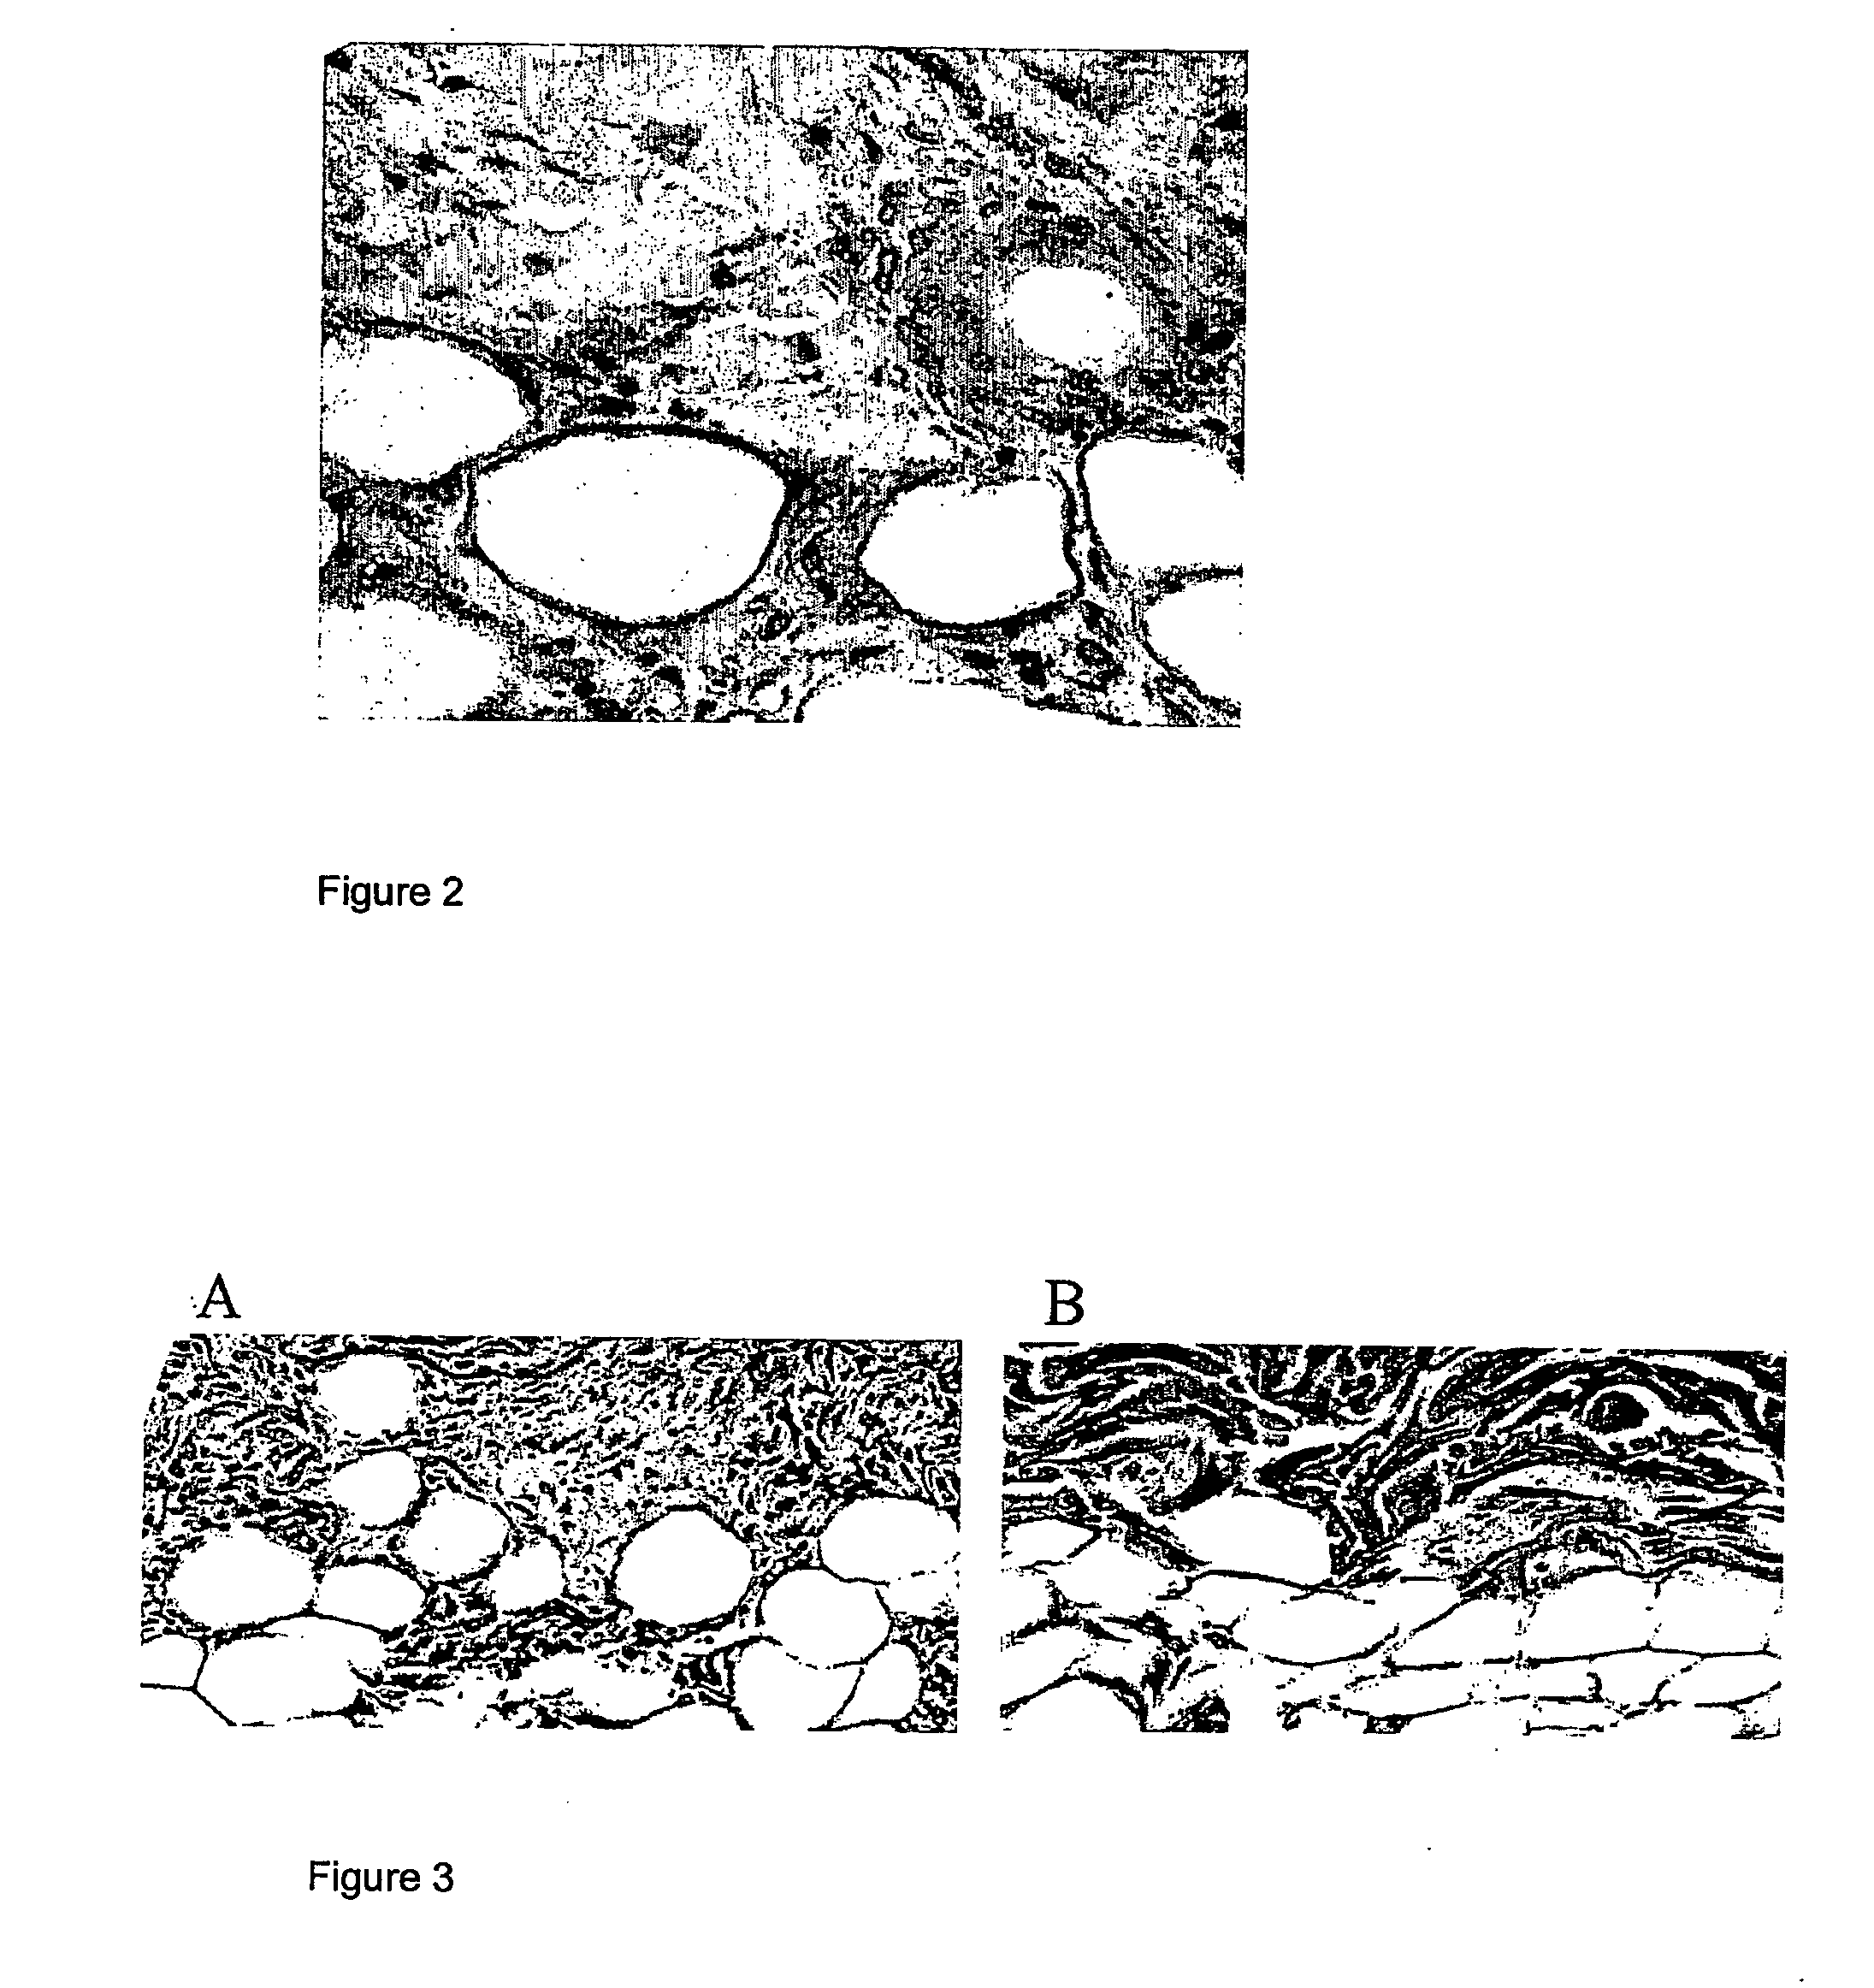 Carbohydrate-based anti-wrinkle and tissue remodelling compounds